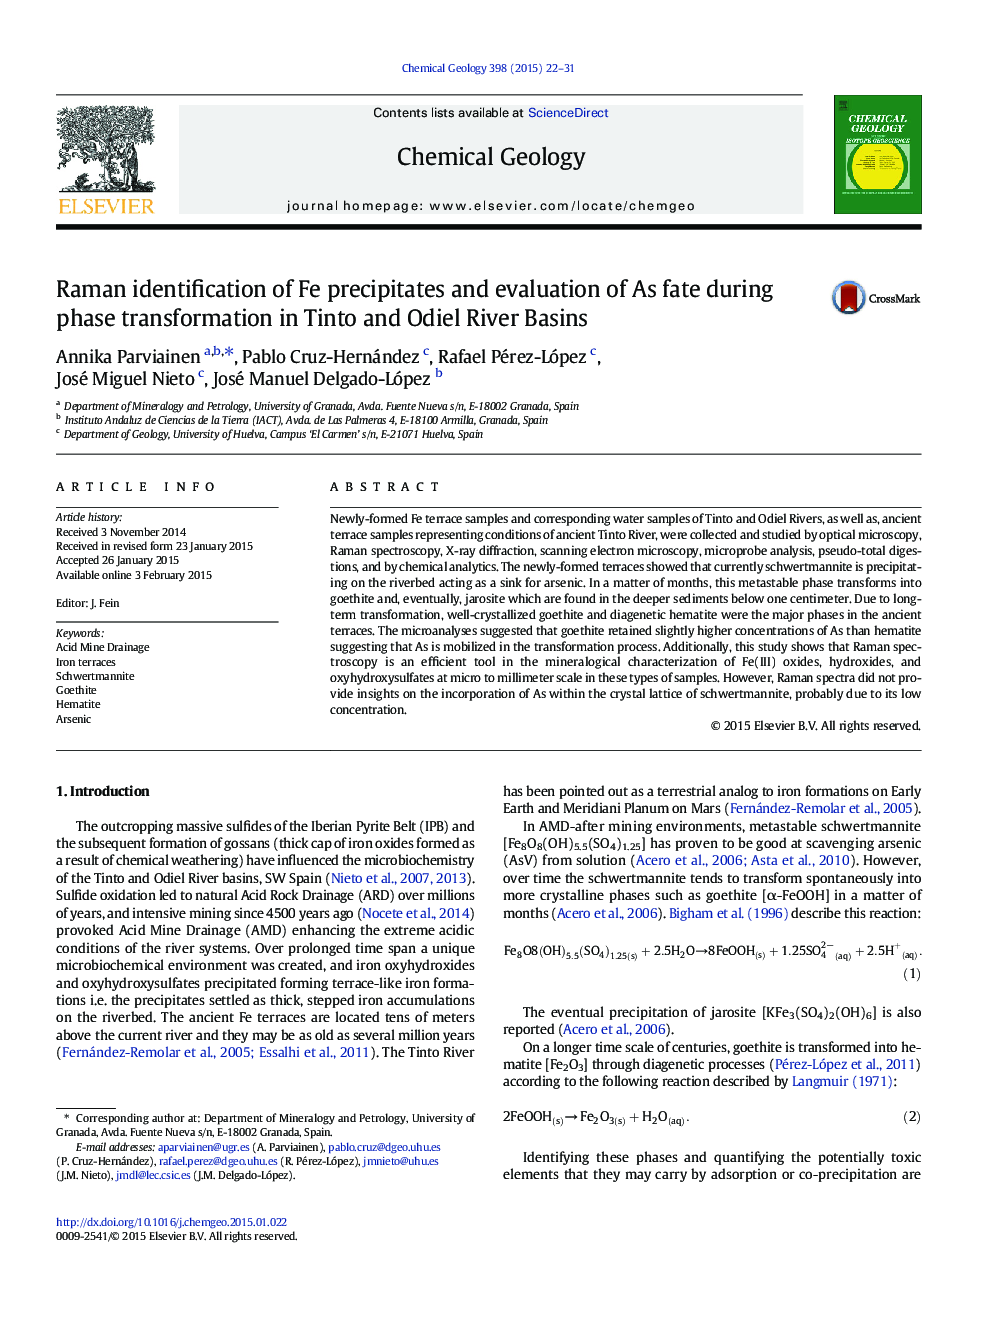 Raman identification of Fe precipitates and evaluation of As fate during phase transformation in Tinto and Odiel River Basins